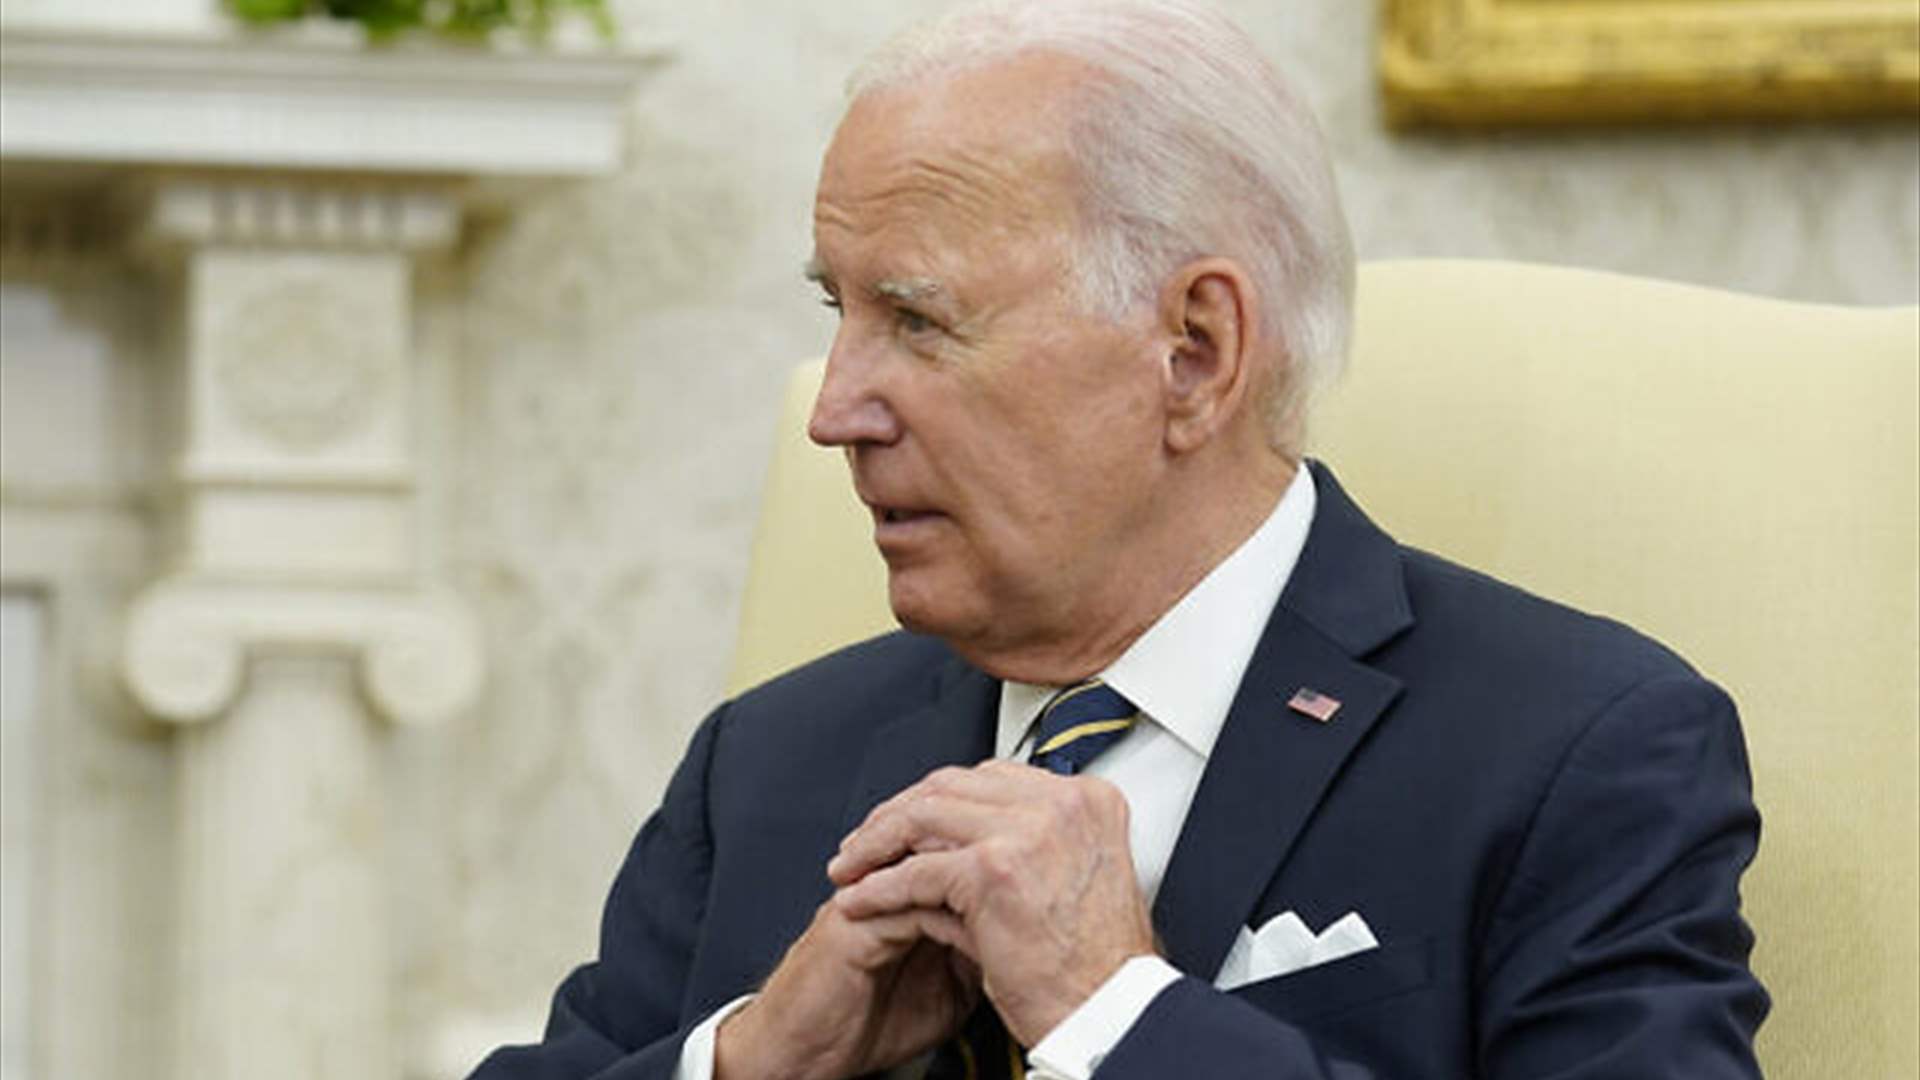 Elders call on Biden to craft viable Middle East peace plan